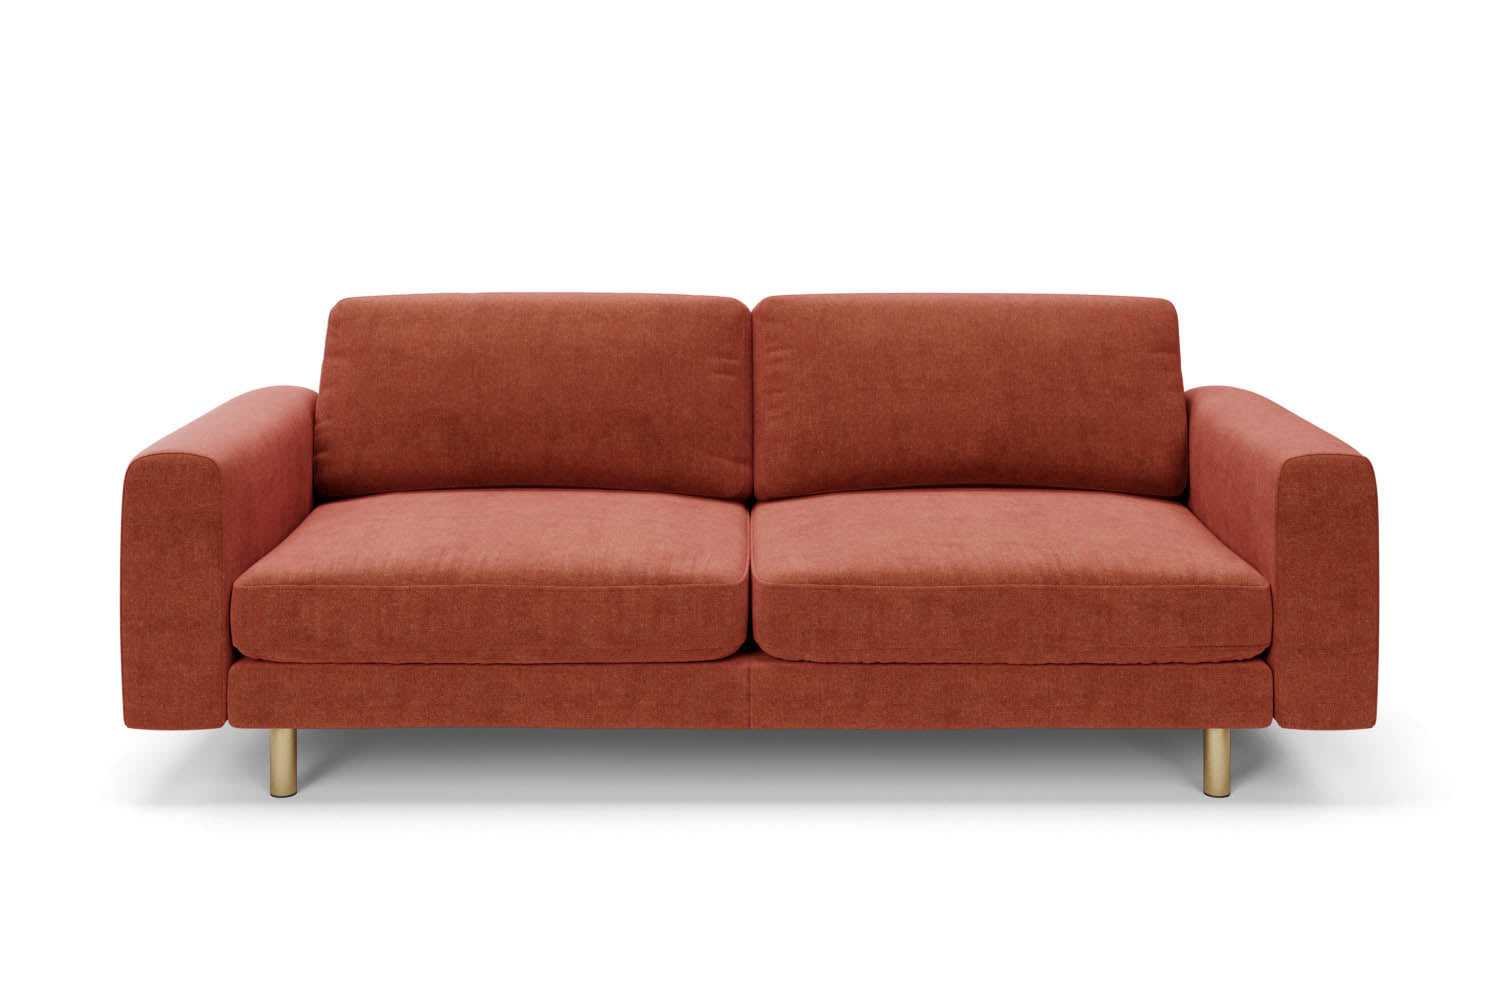 The Big Chill 3 Seater Sofa in Spice Chenille with metal legs front variant_40886267379760